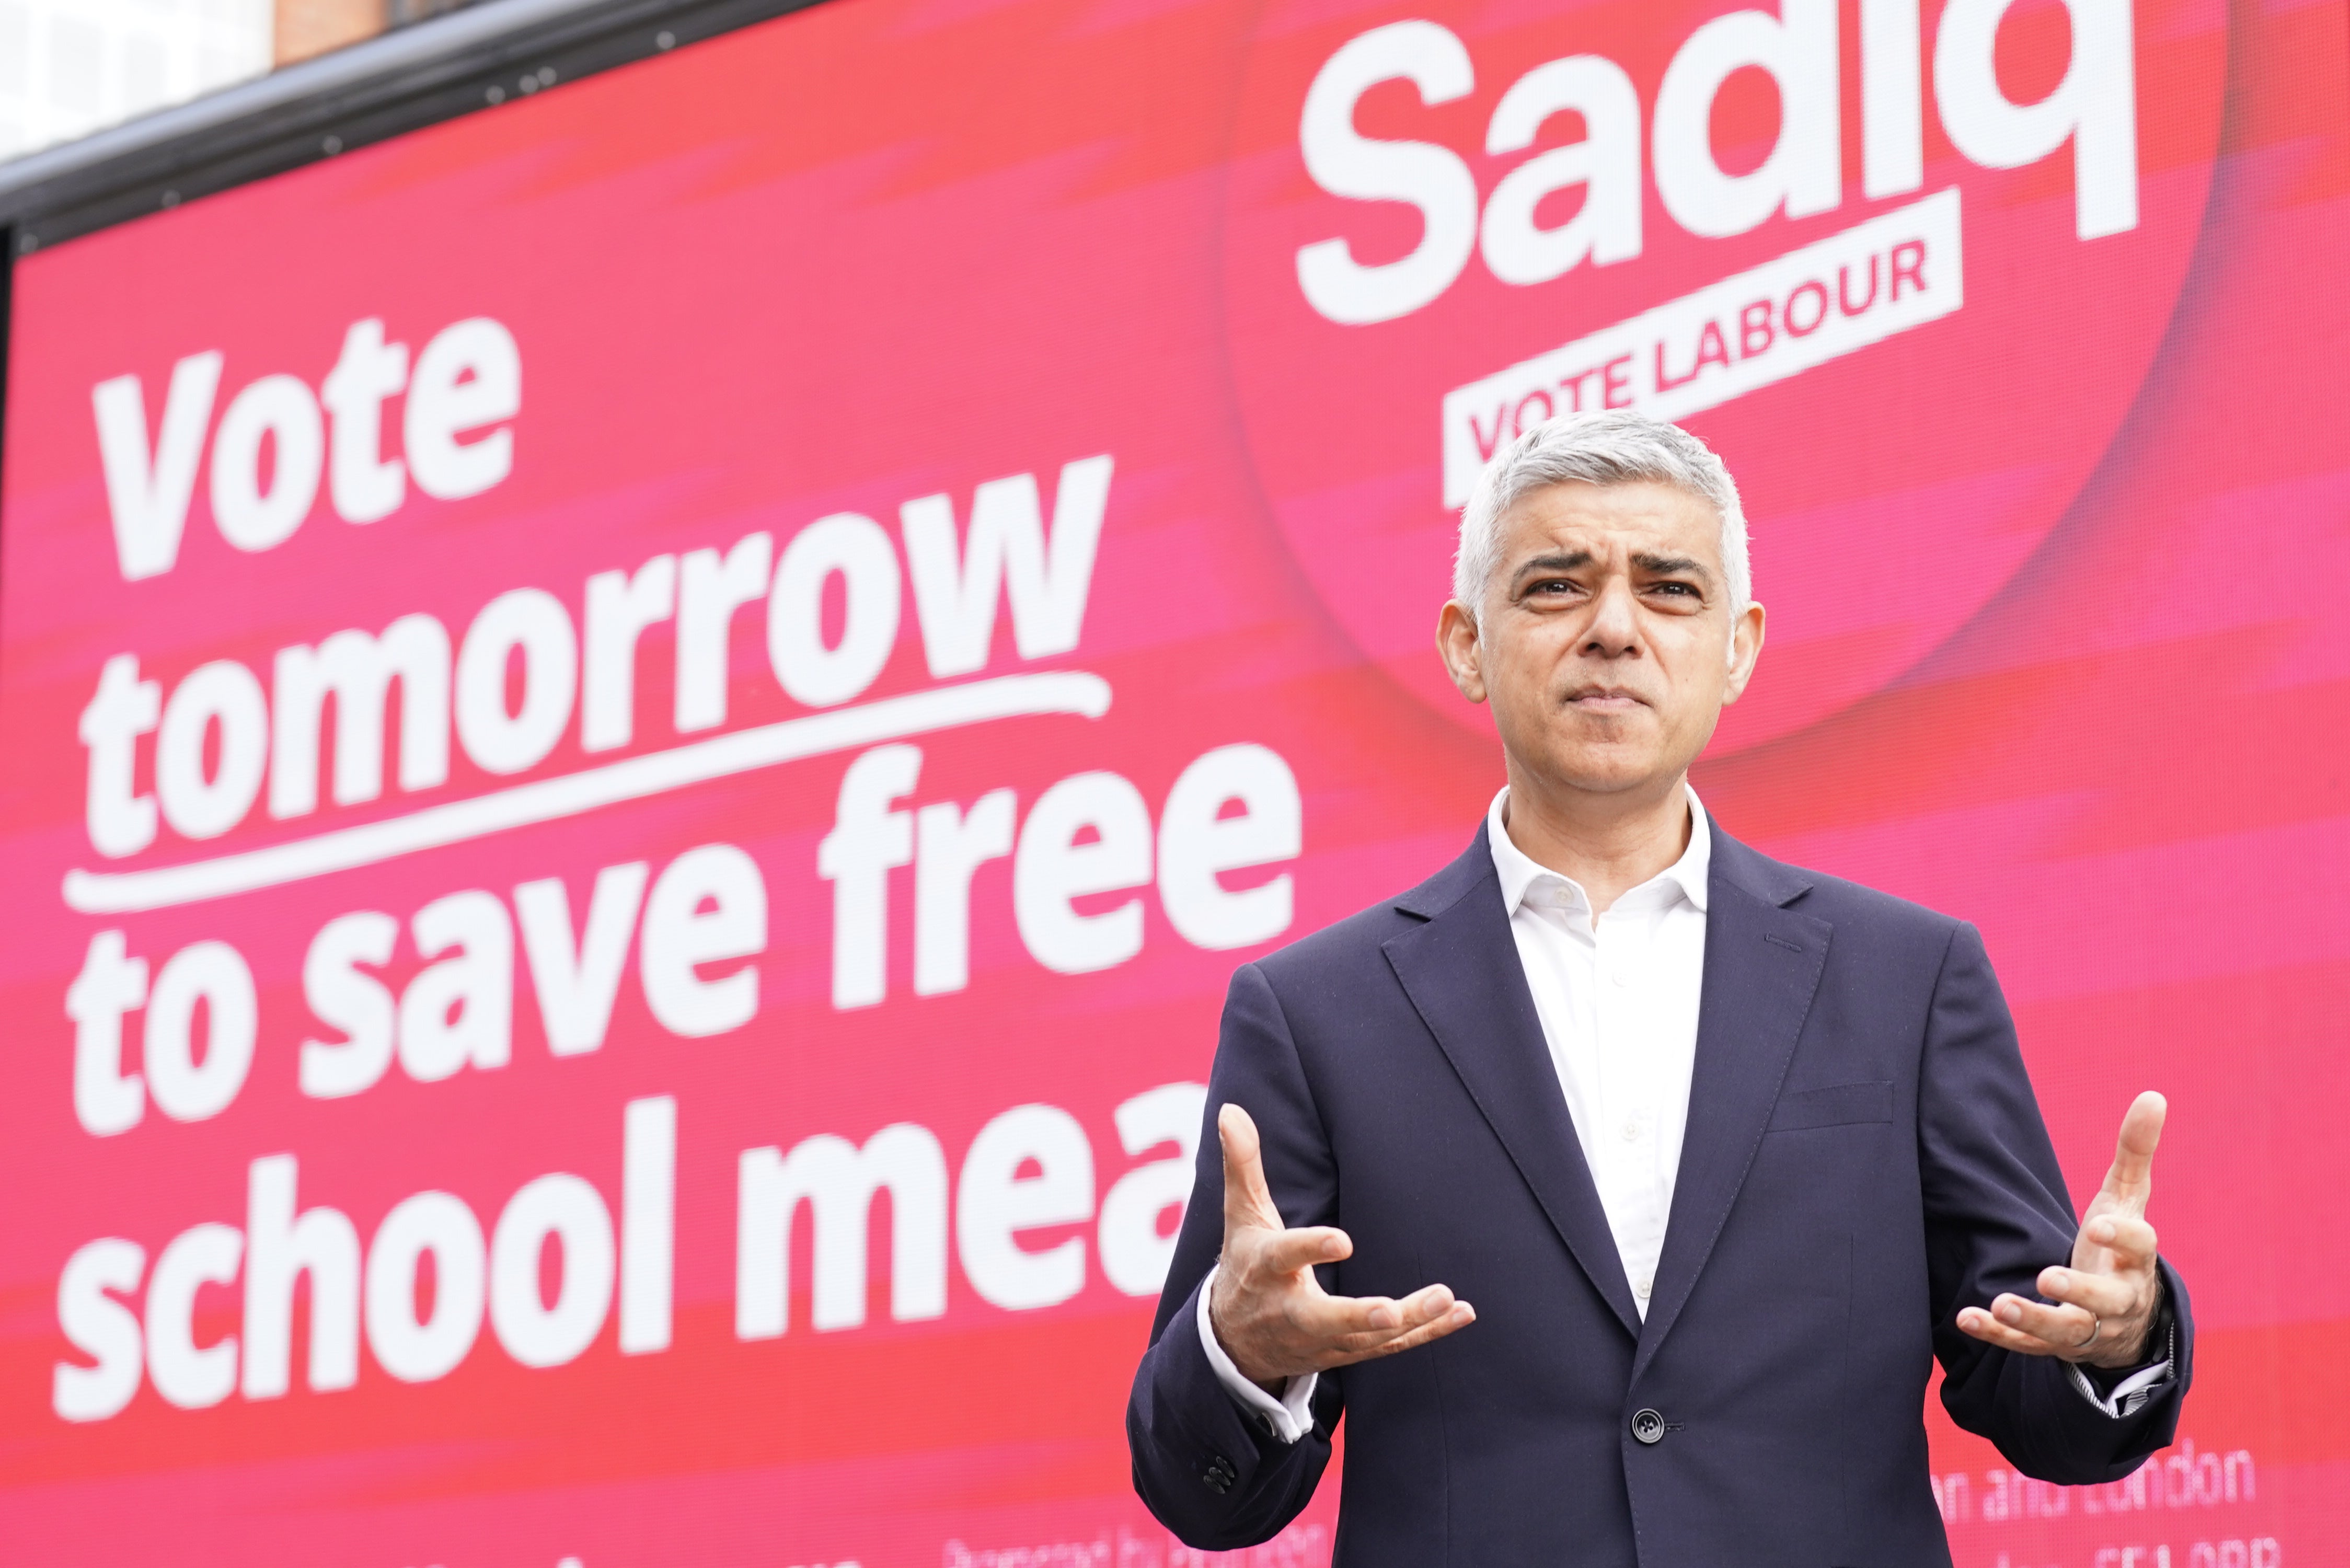 Low turnout in the capital could put Sadiq Khan’s chances in jeopardy